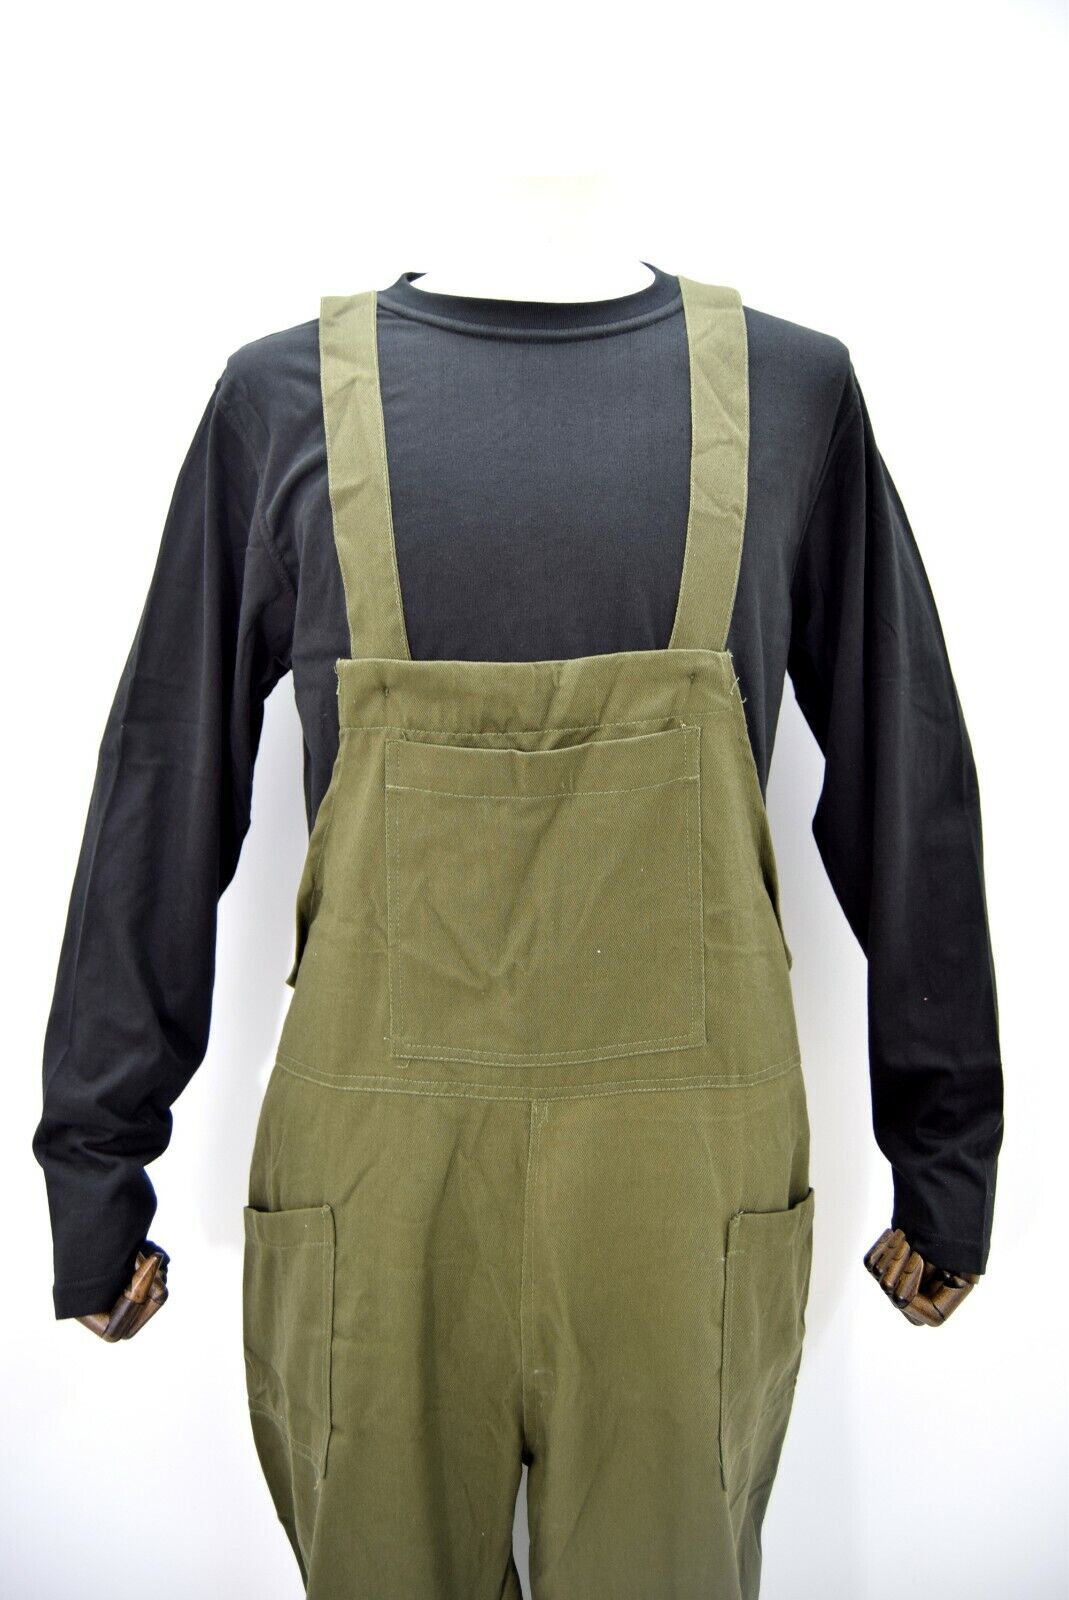 British Army Style Olive Bib & Brace Overalls / Dungarees Heavy Cotton Trousers